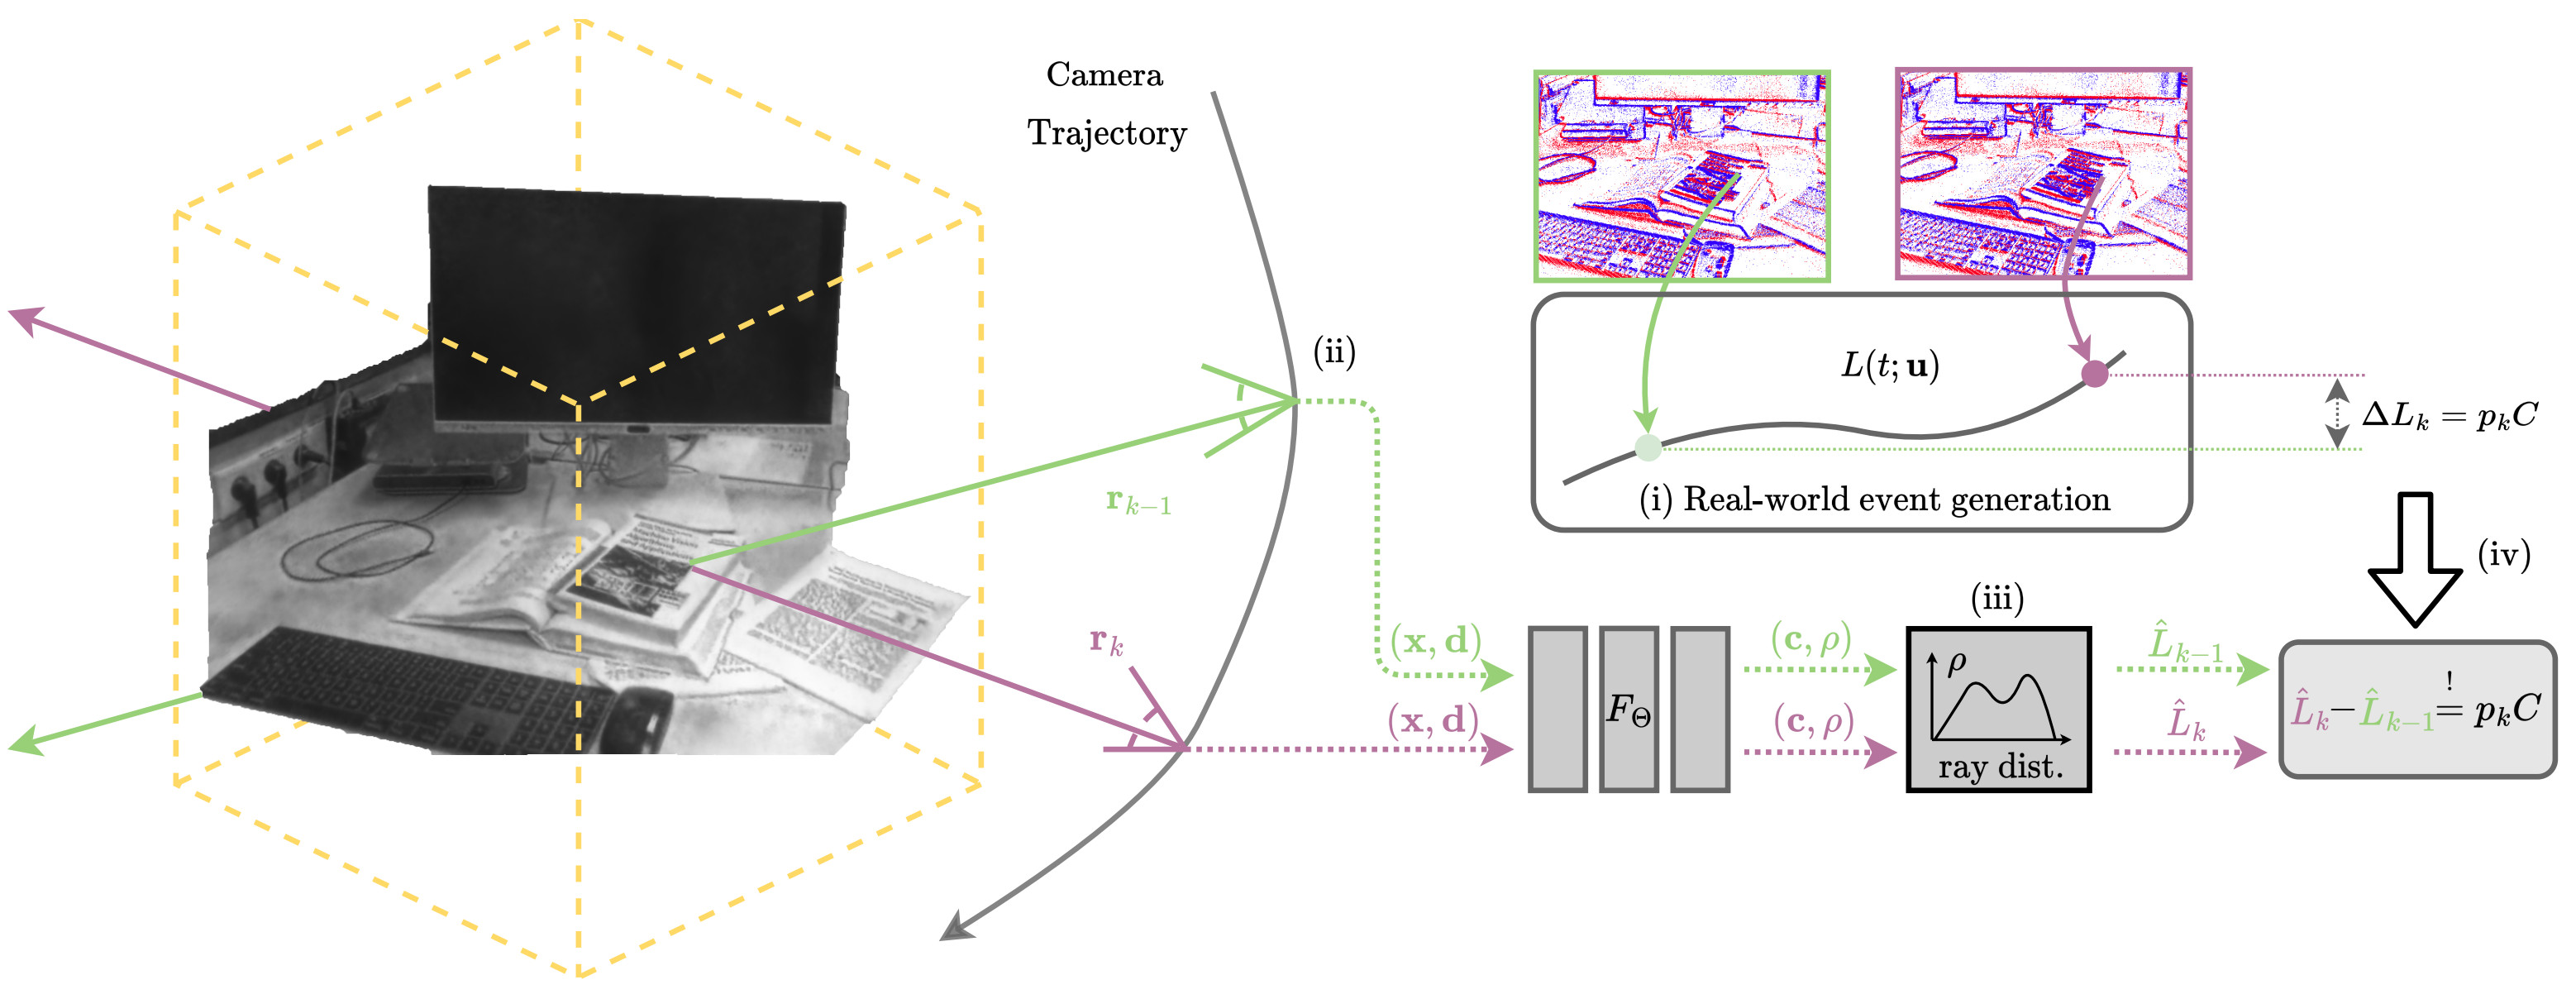 E-NeRF: Neural Radiance Fields from a Moving Event Camera